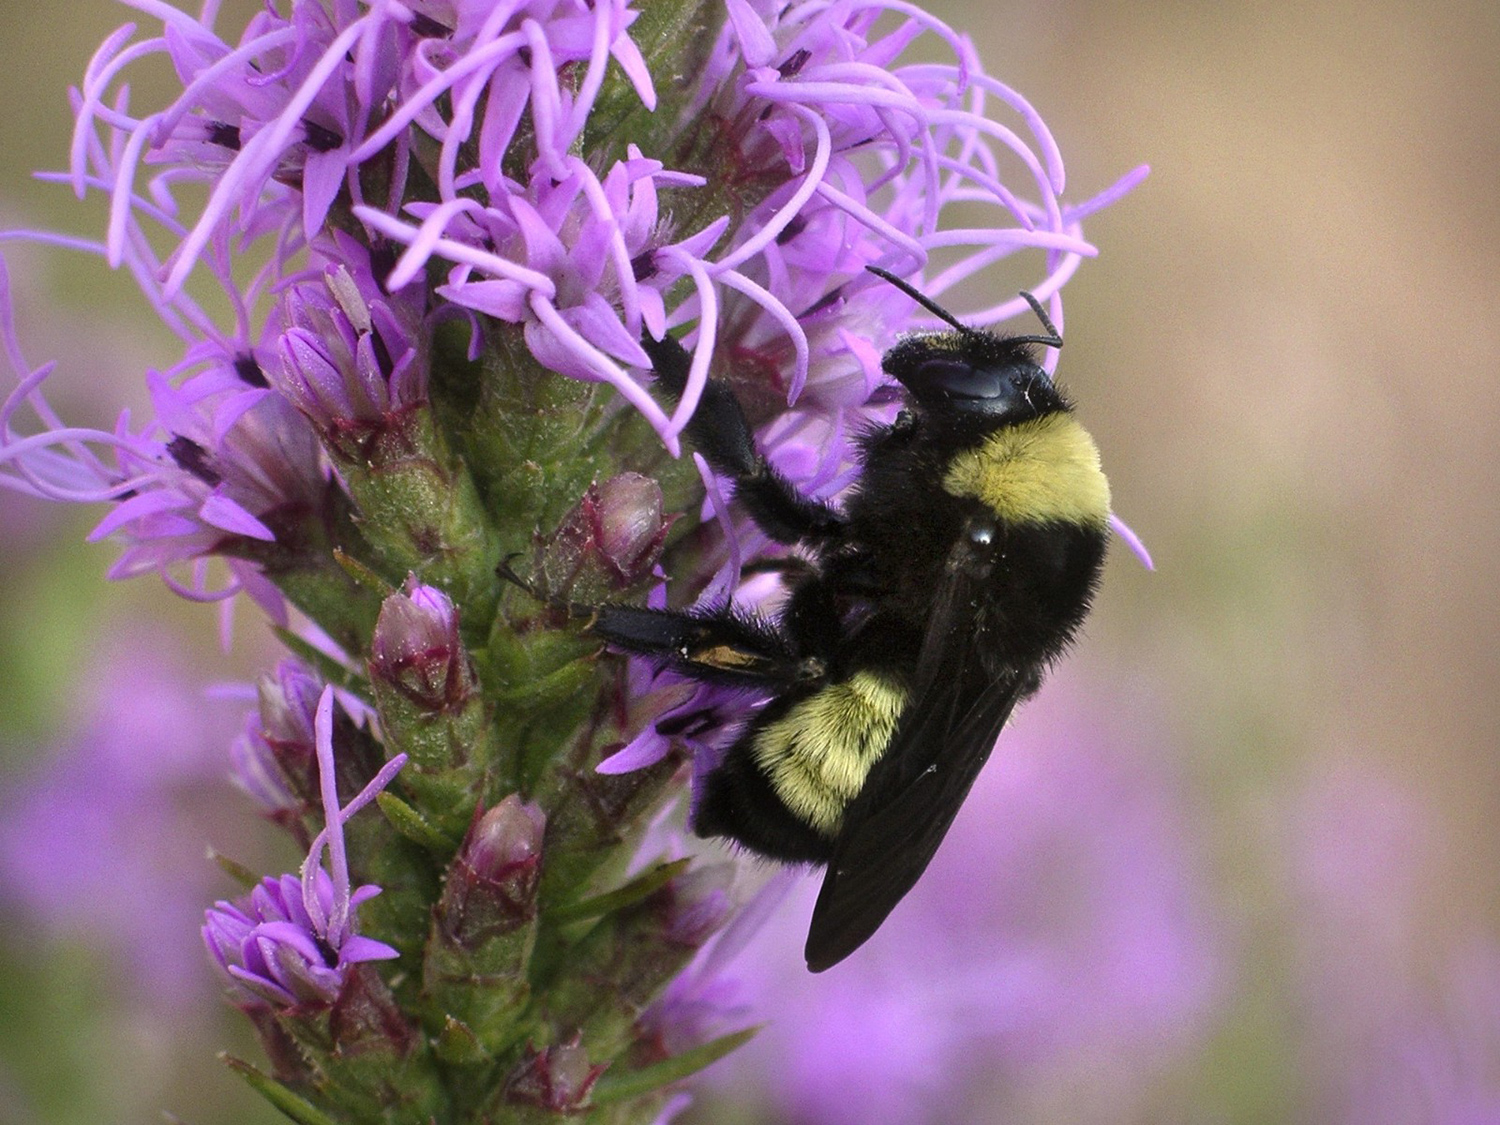 Bumble bee on gayfeather, photo by Val Bugh